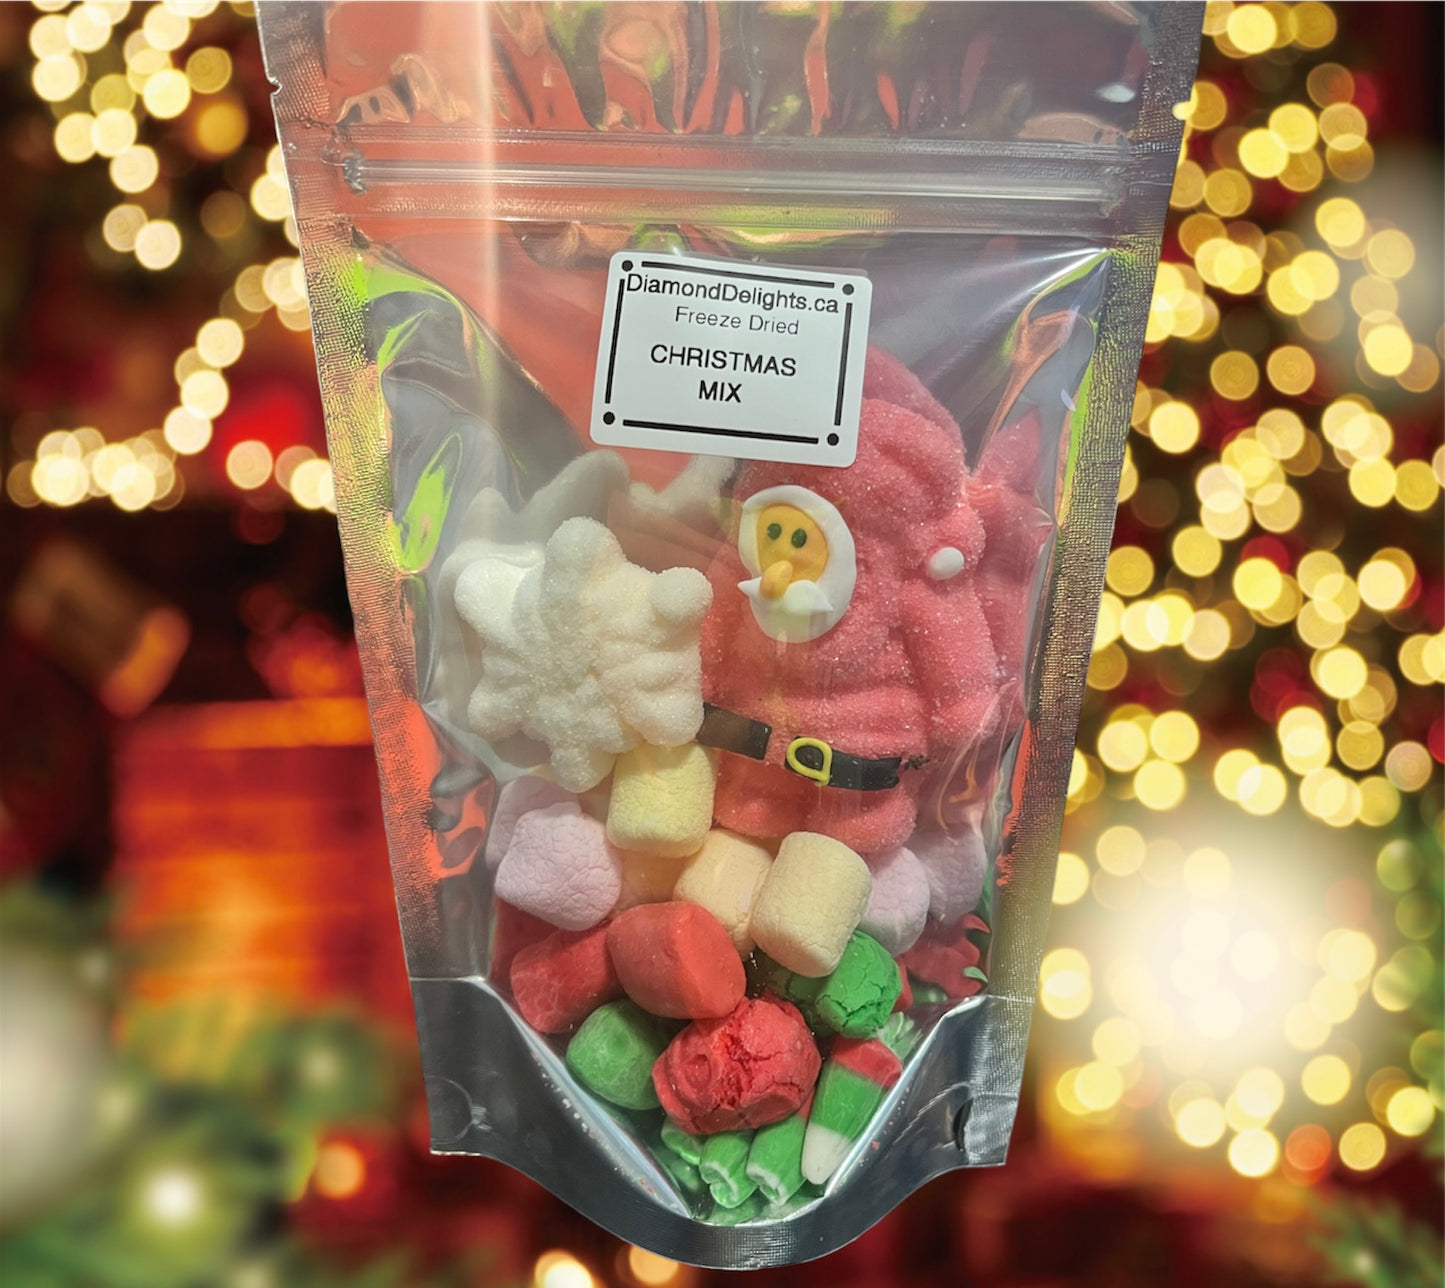 Freeze Dried “Deck the Halls” Christmas Gift mix | Diamond Delights